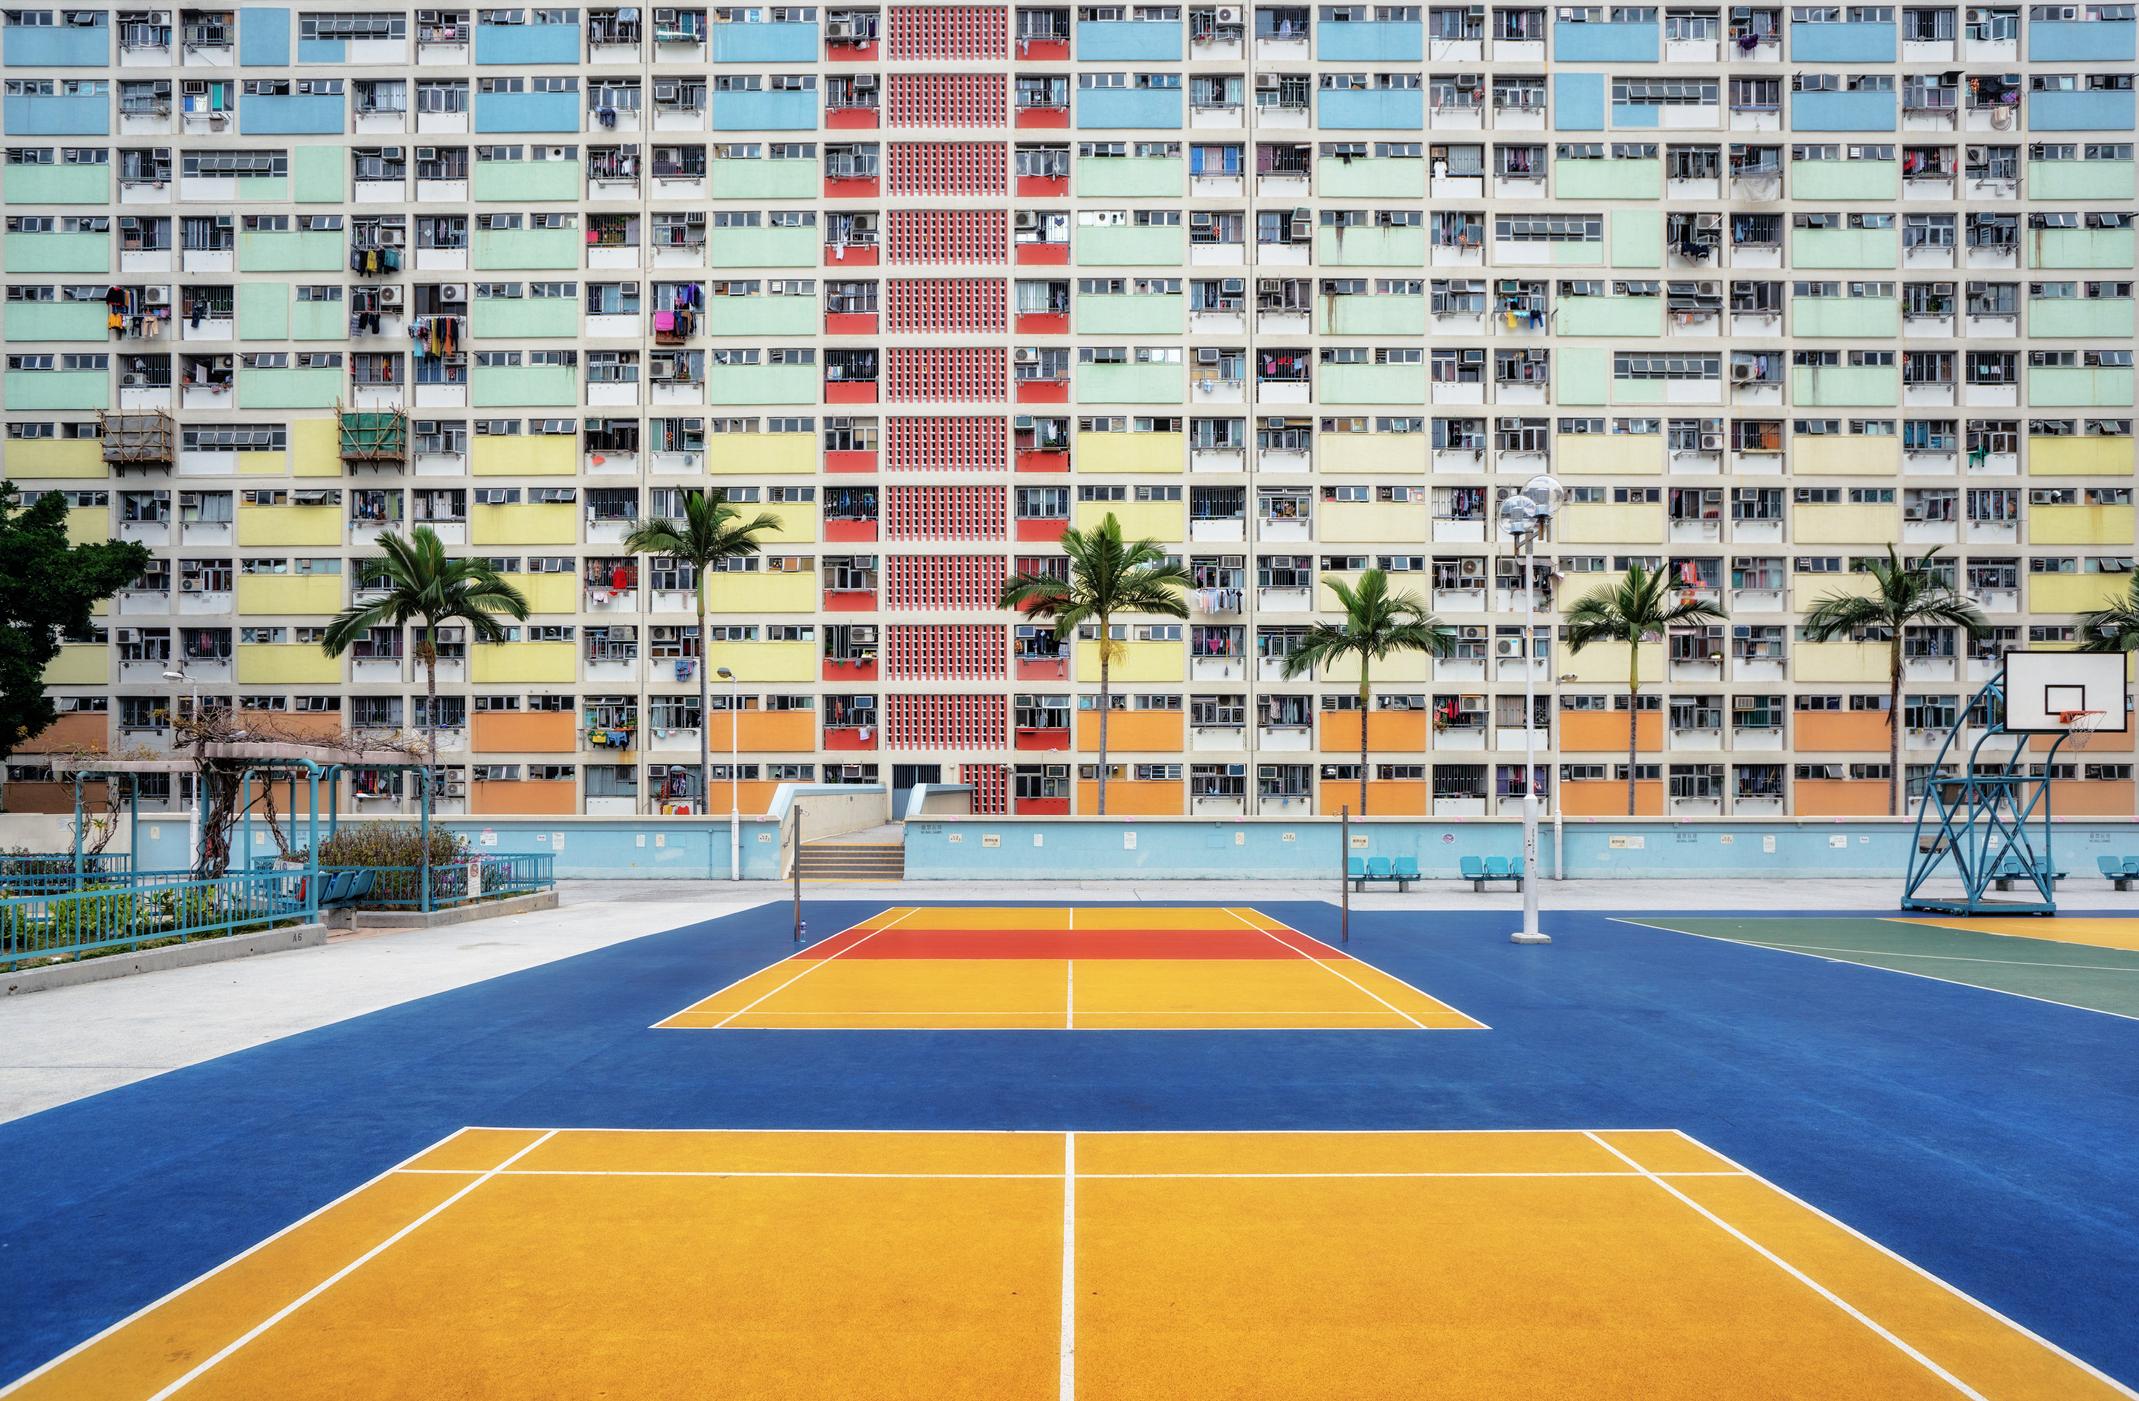 9 of the Most Beautiful Basketball Courts Around the World - Hong Kong